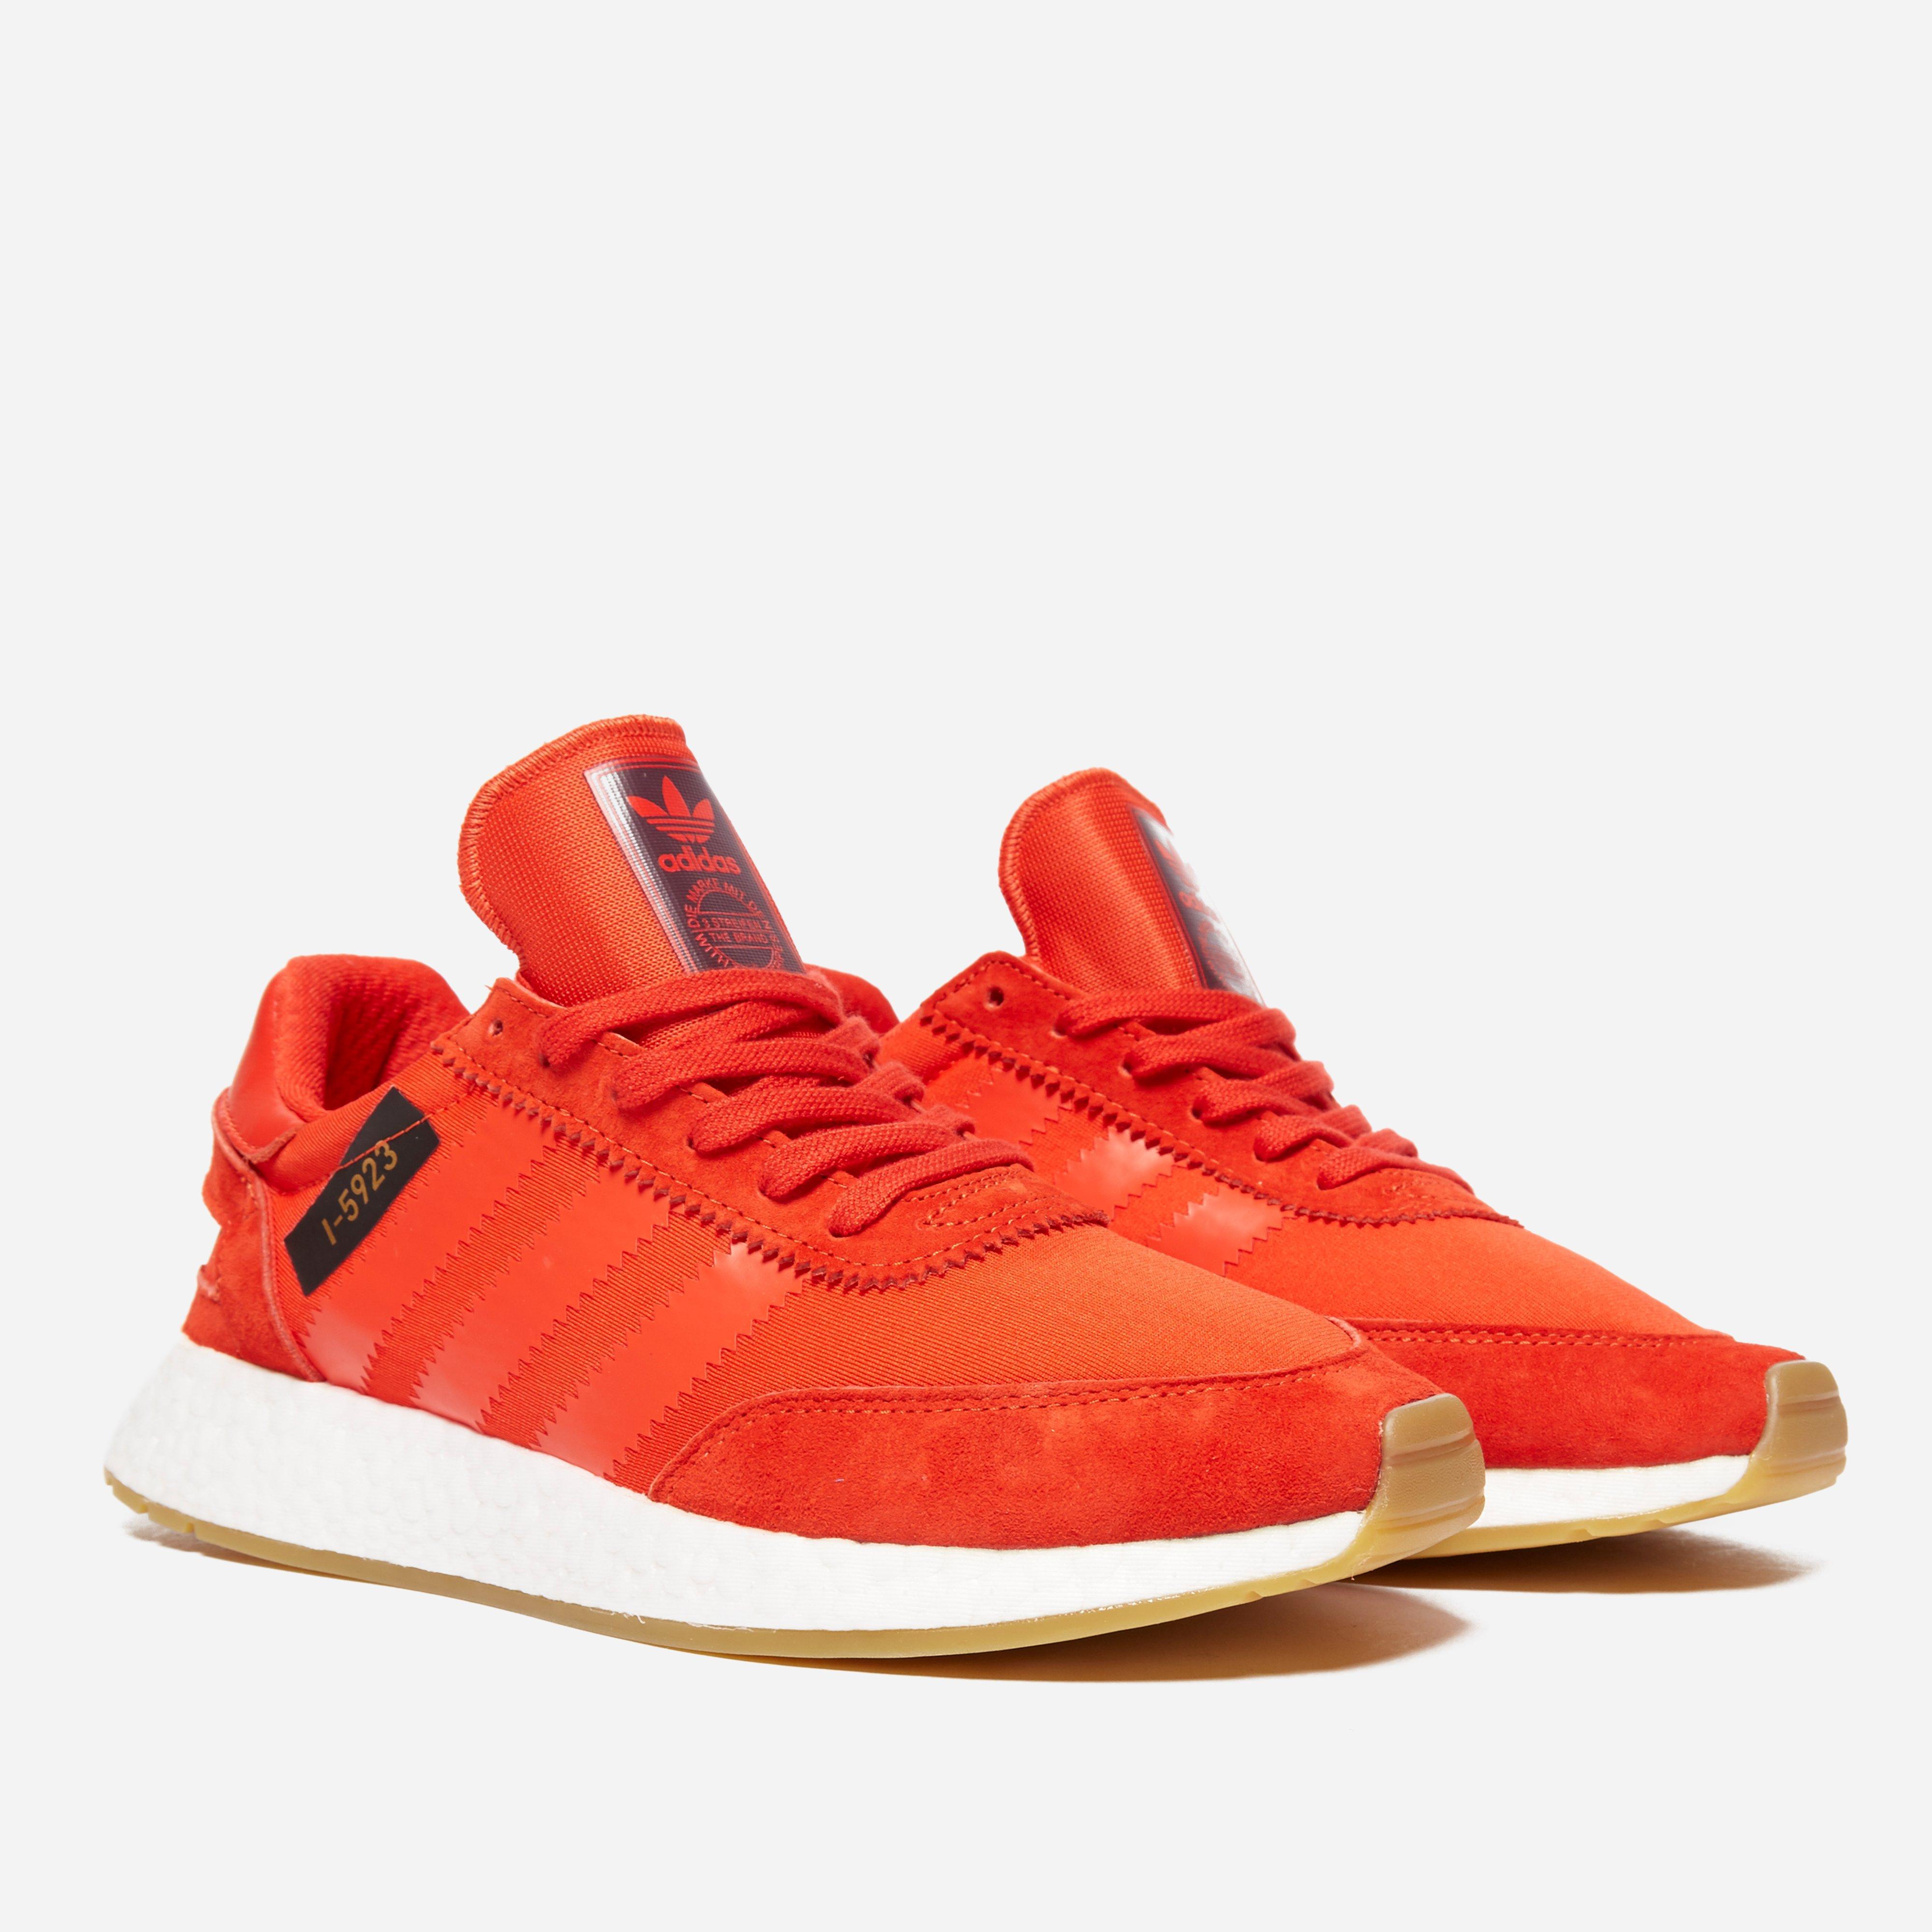 adidas Originals Synthetic I-5923 in Red for Men - Lyst